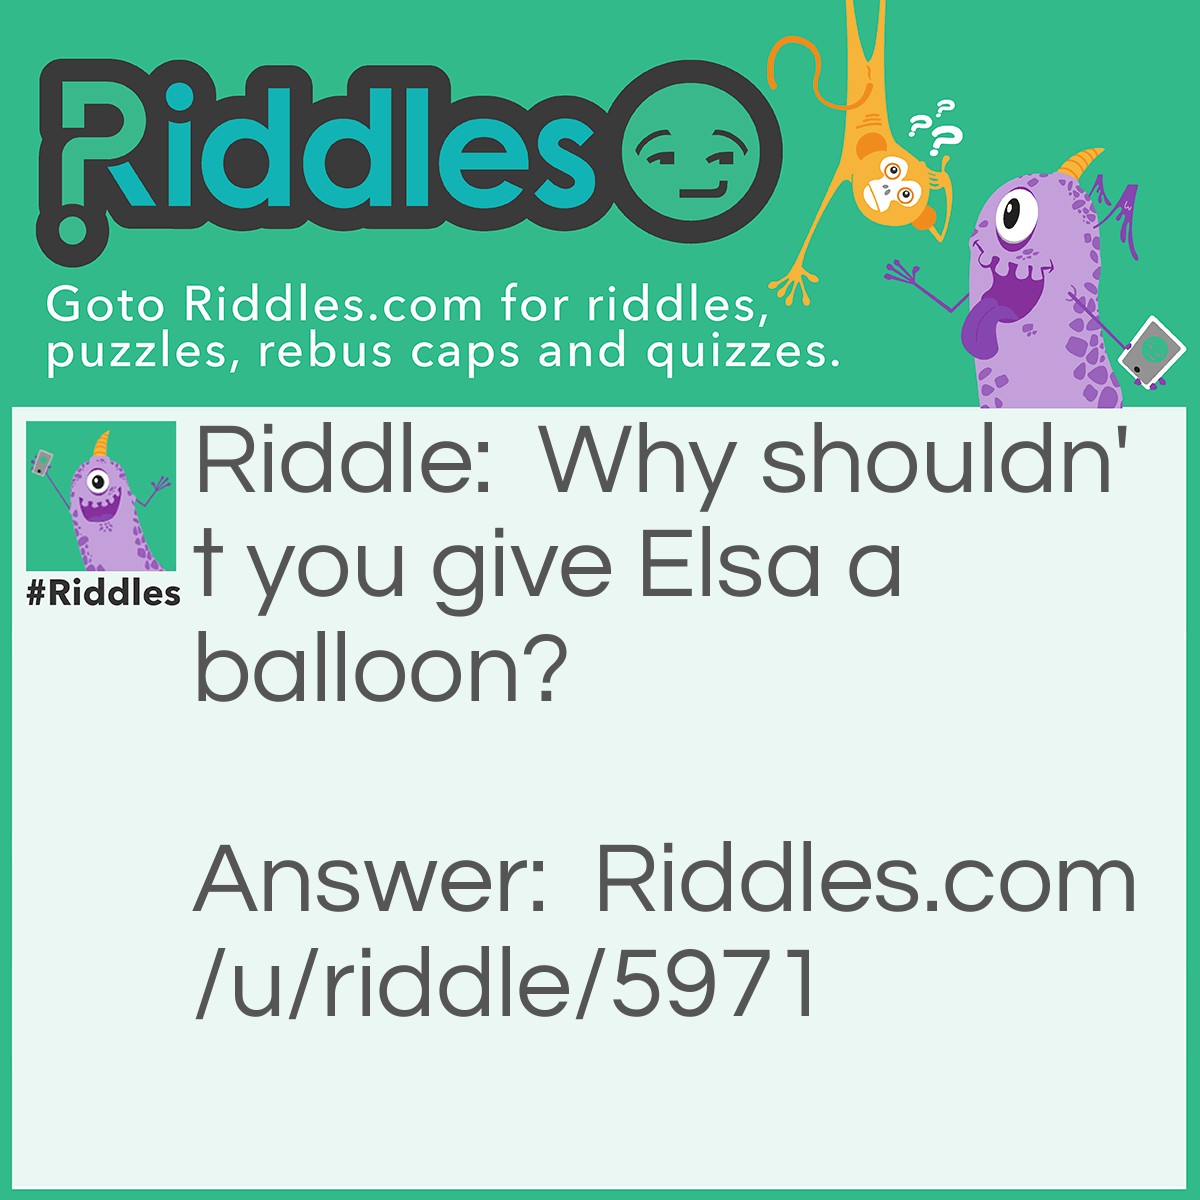 Riddle: Why shouldn't you give Elsa a balloon? Answer: Cause she'll let it go!